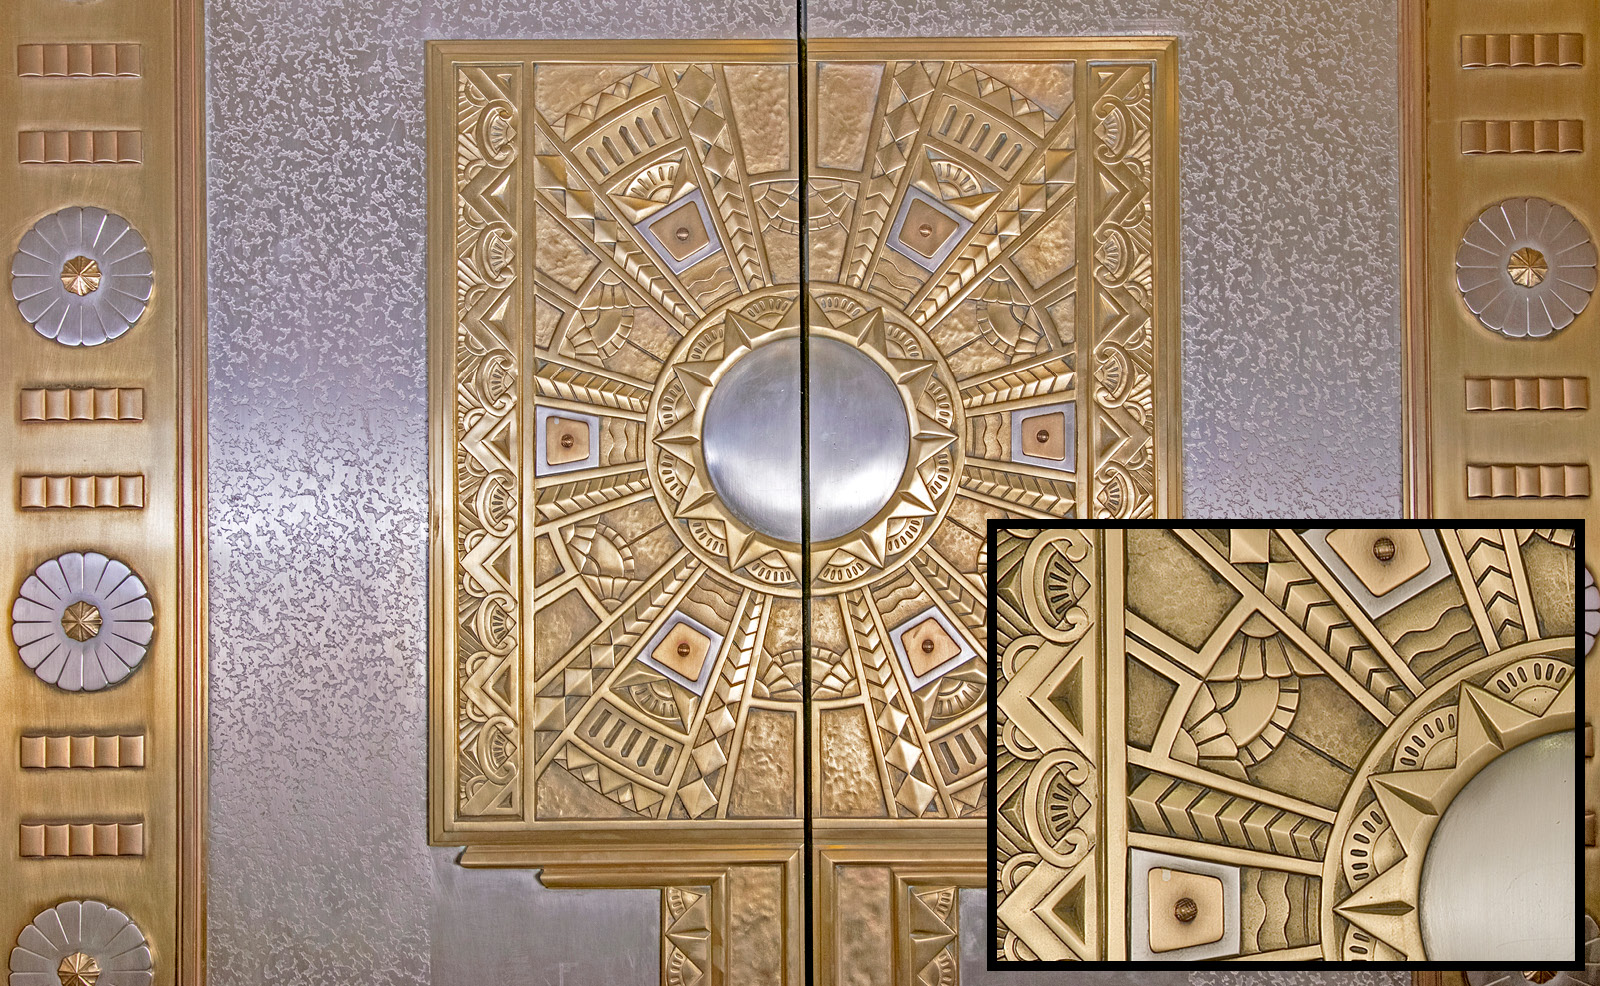 Image of the ornate elevator doors with an inset of the bronze and nickel design